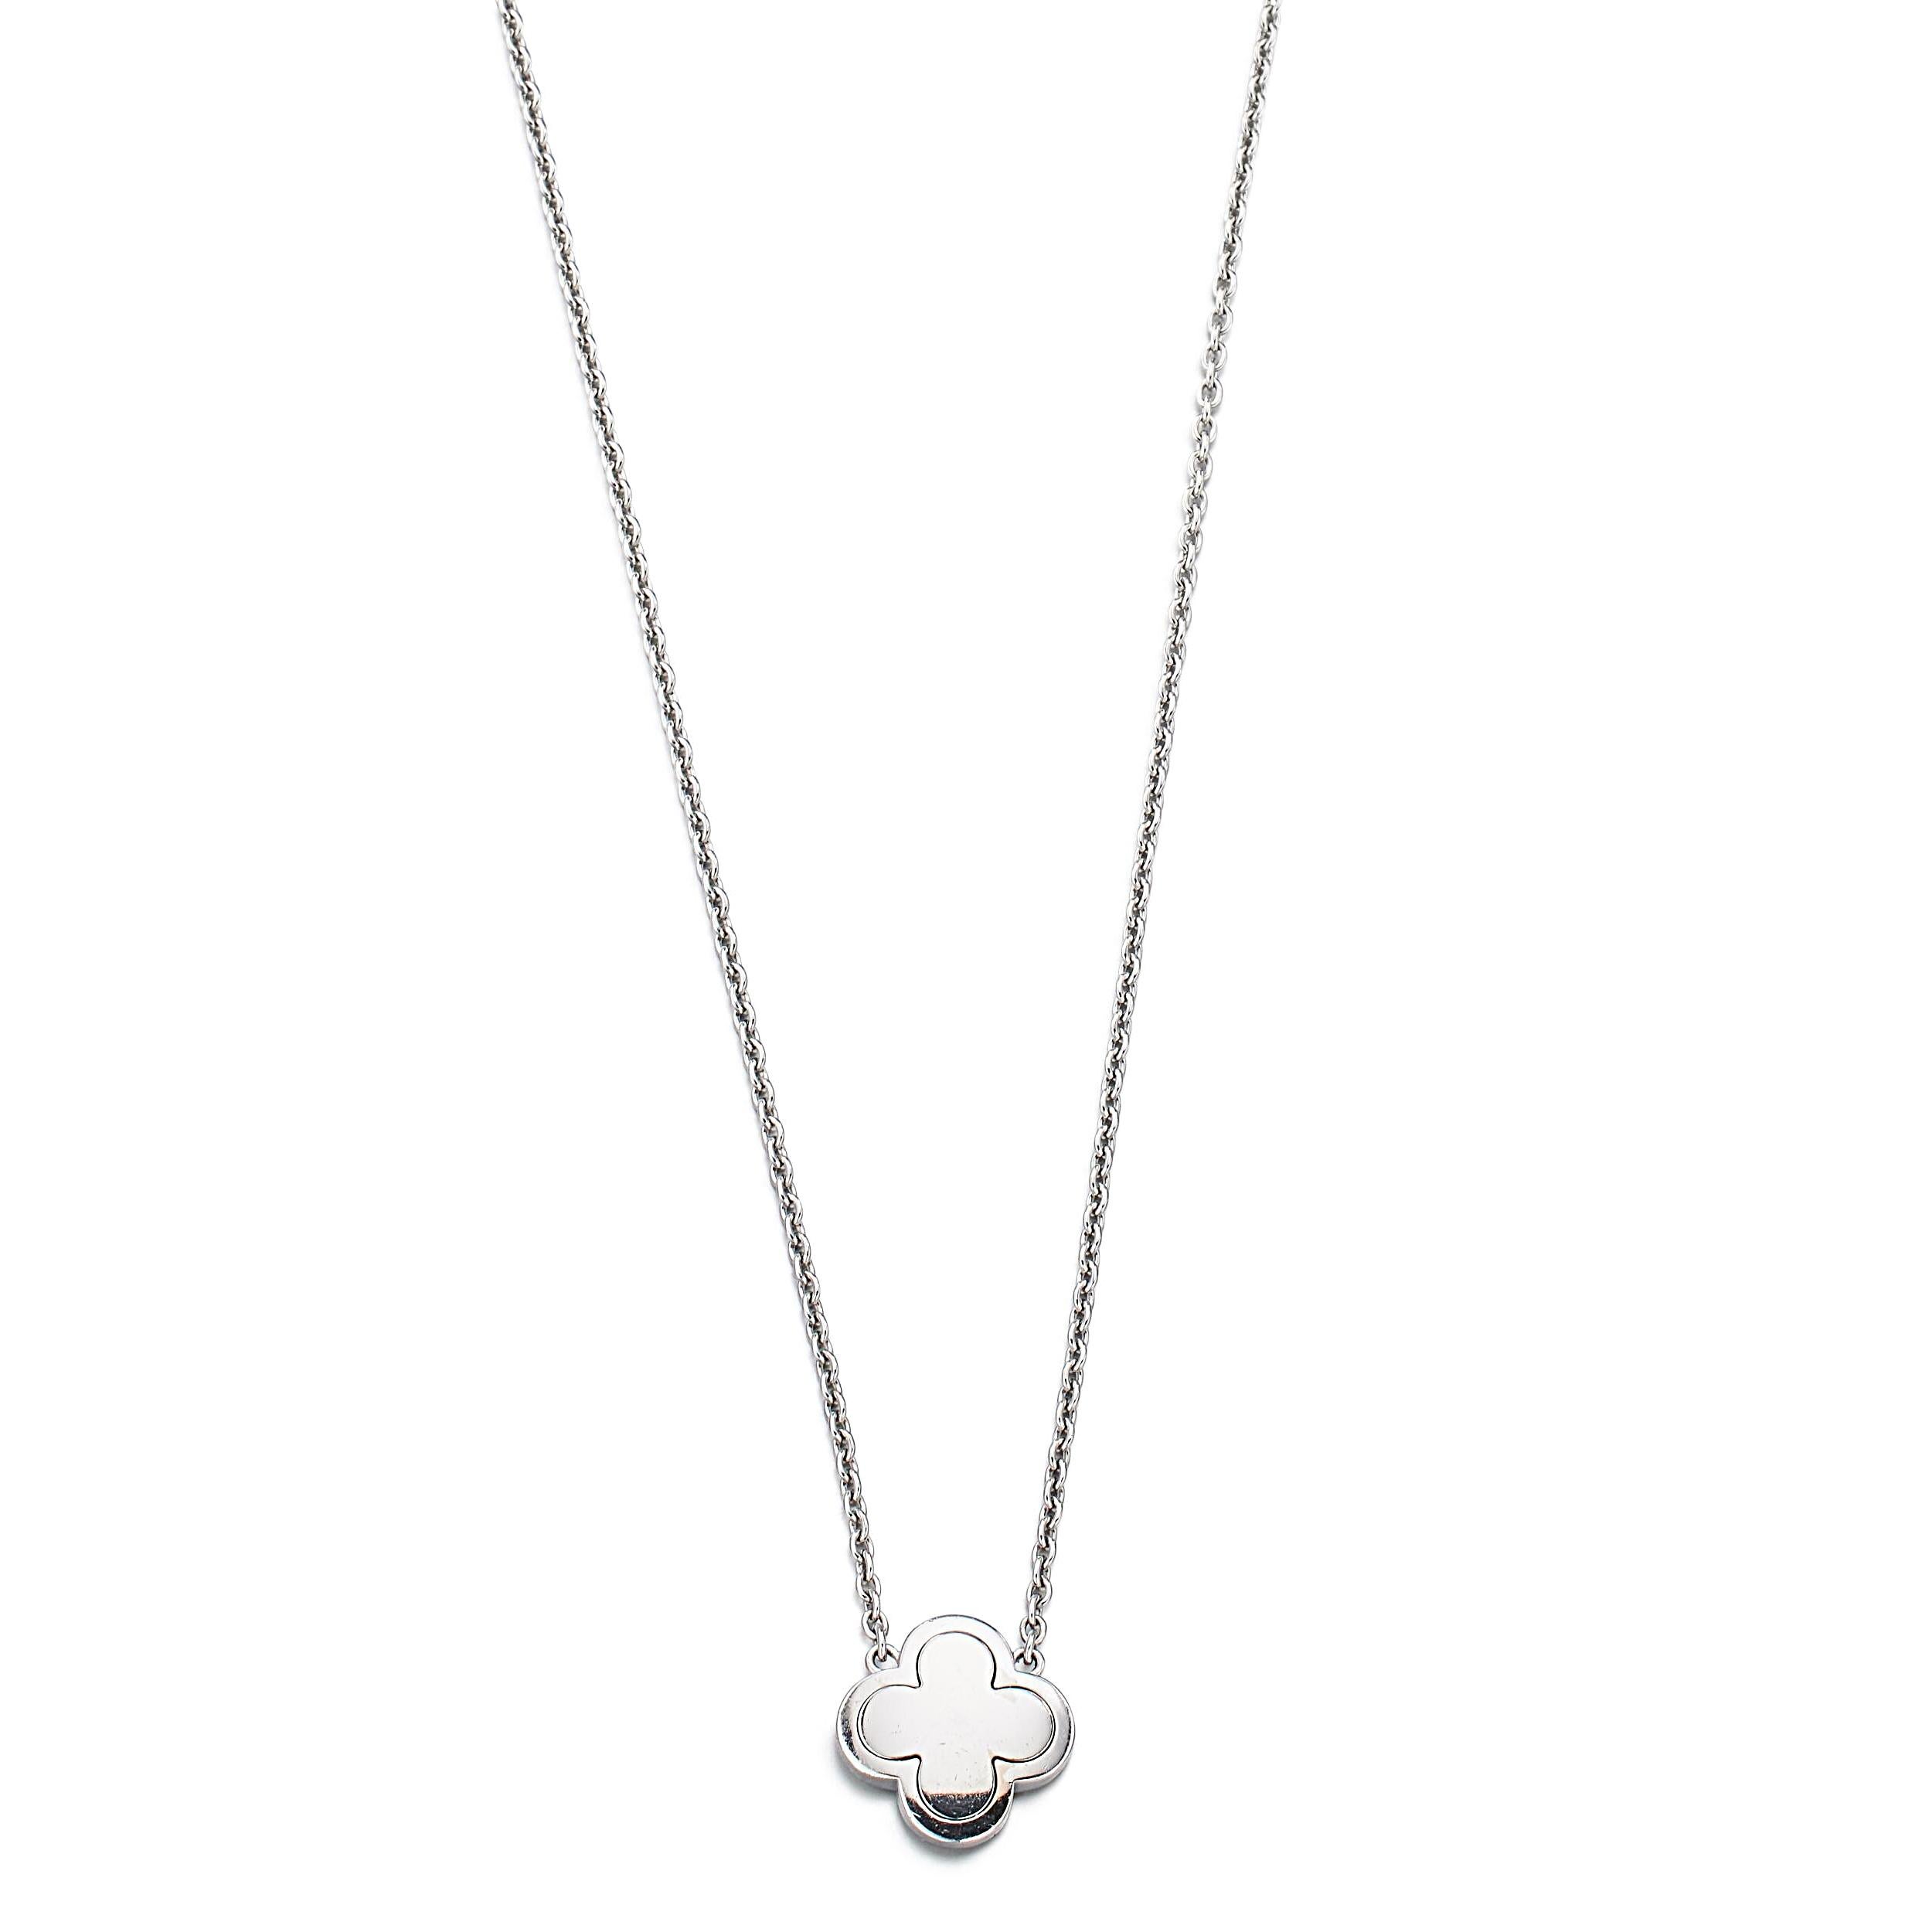 This Van Cleef & Arpels Pure Alhambra necklace is an embodiment of timeless elegance and the hallmark craftsmanship that the Maison is renowned for.